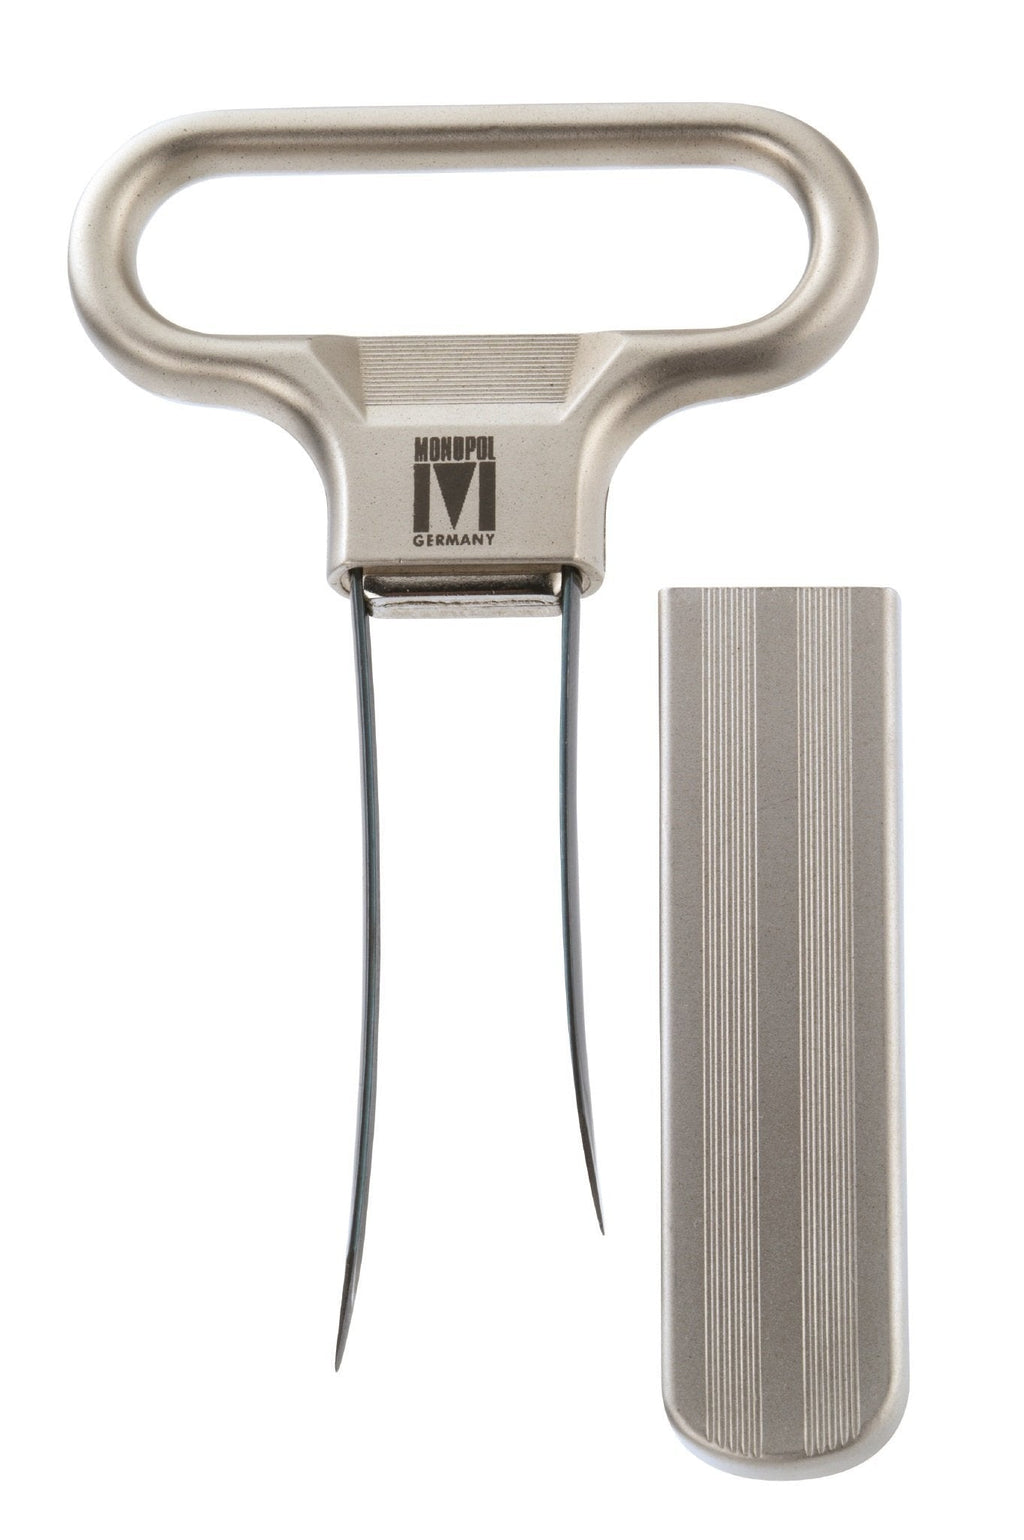  [AUSTRALIA] - Monopol Westmark Germany Steel Two-Prong Cork Puller with Cover (Silver Satin) 1